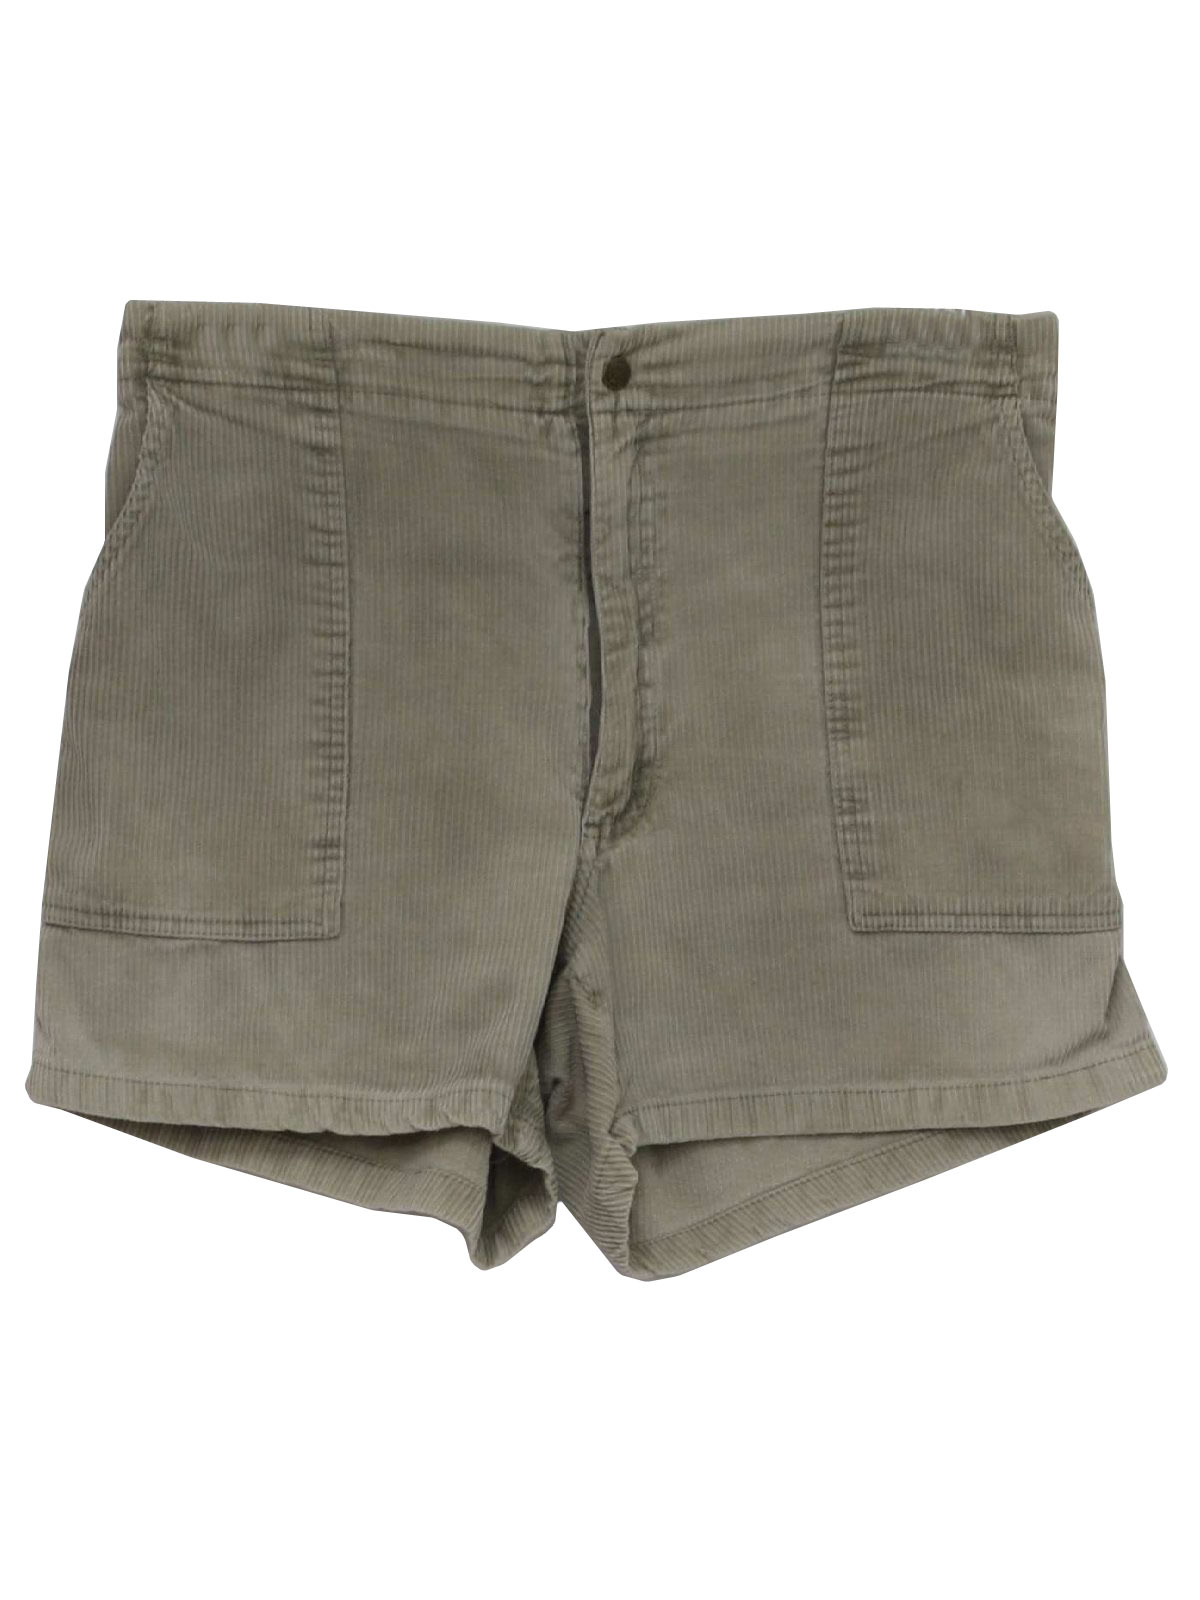 Retro 1980s Shorts: 80s style (made in 90s) -Towncraft- Mens khaki wide ...